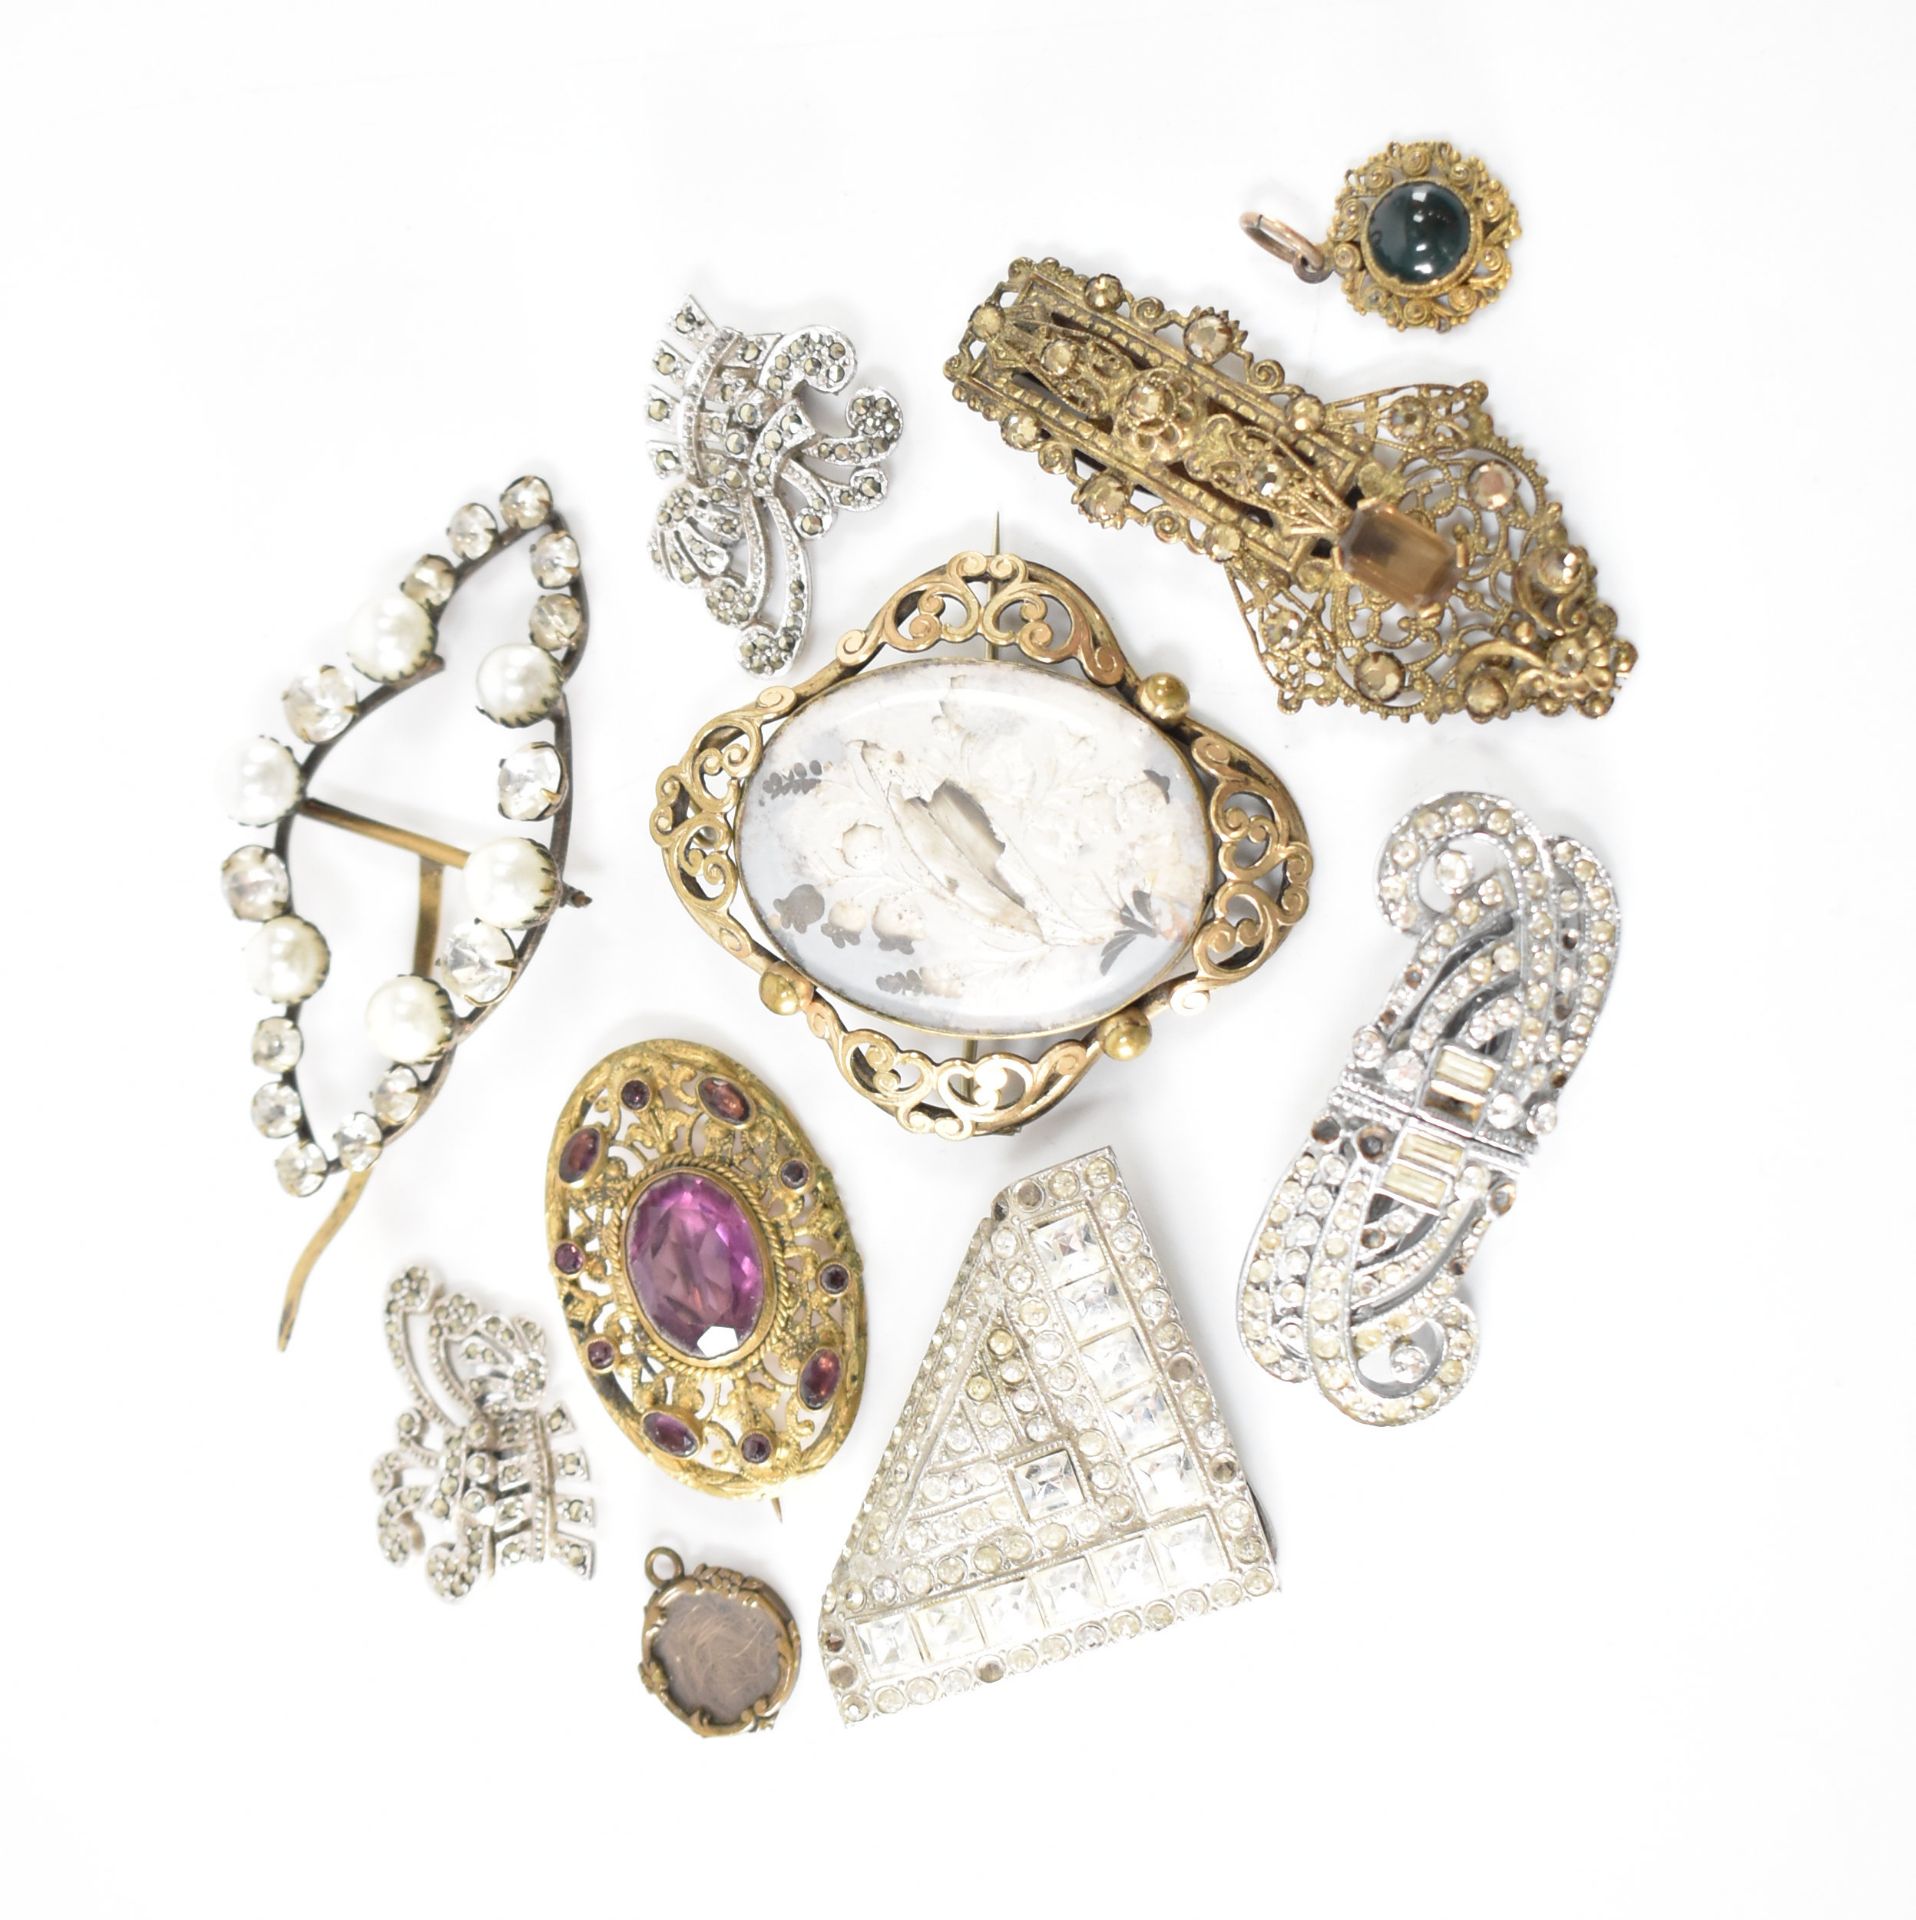 COLLECTION OF ANTIQUE & ART DECO BROOCHES